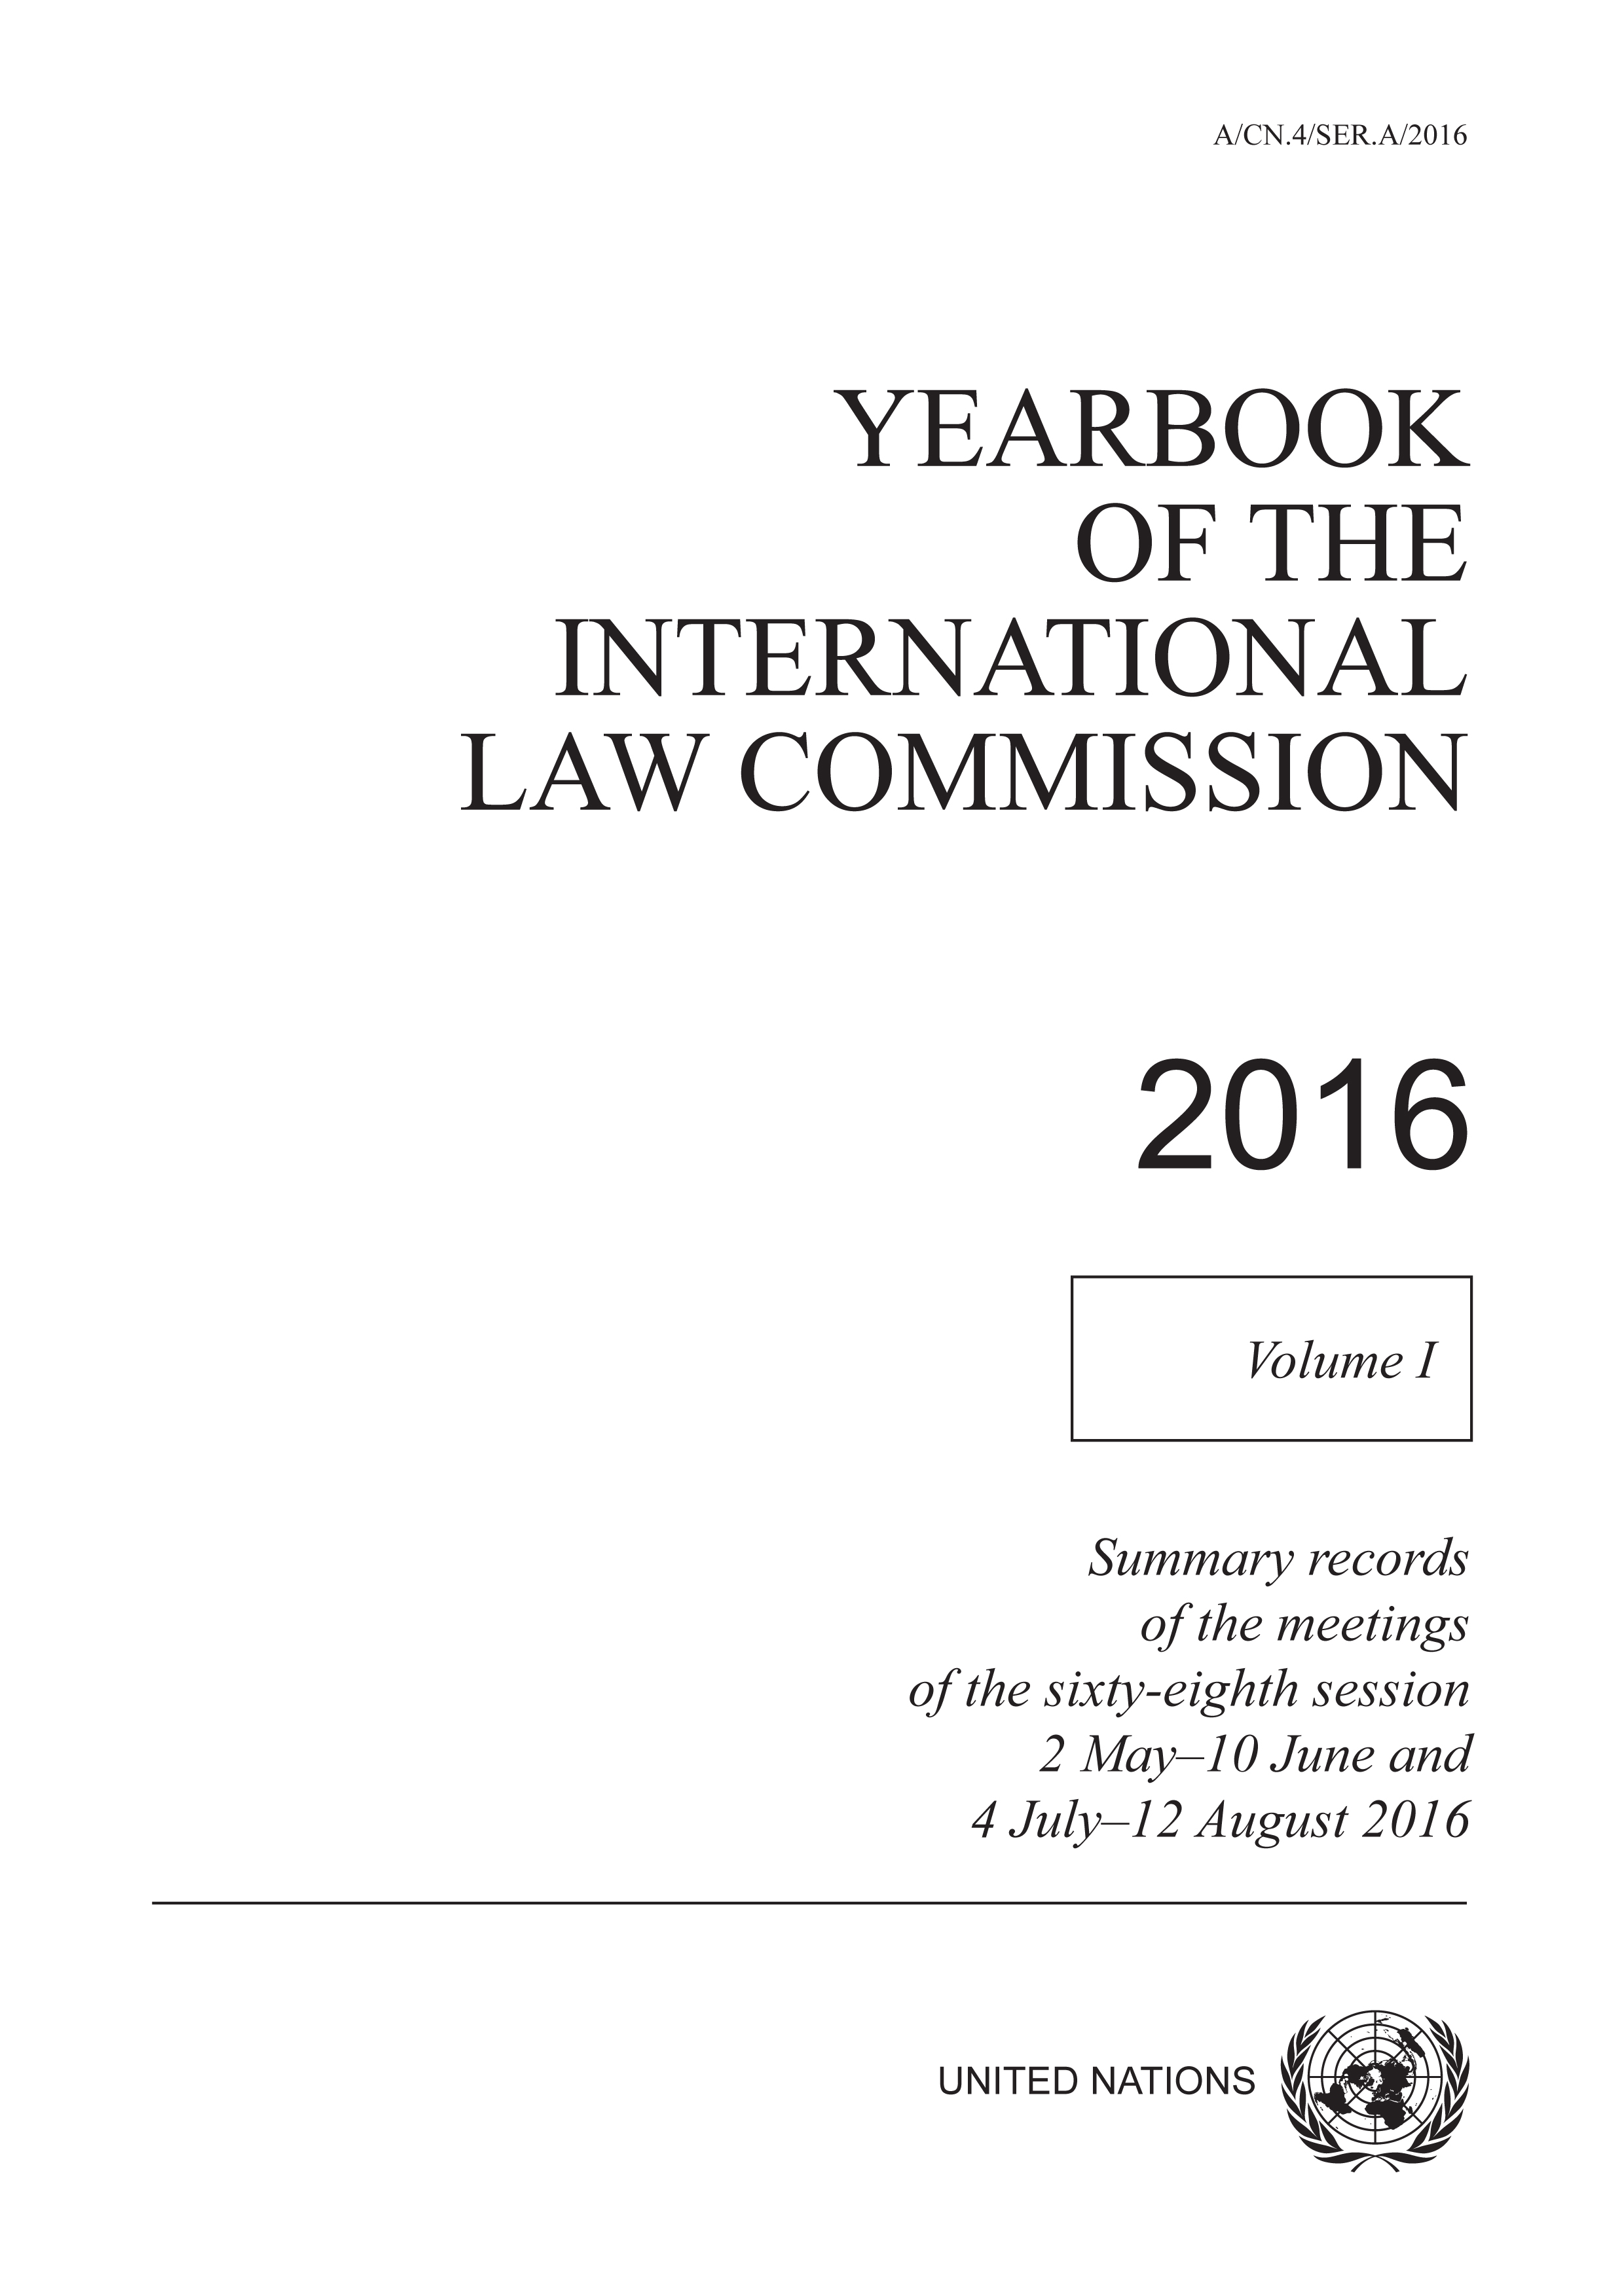 image of Yearbook of the International Law Commission 2016, Vol. I